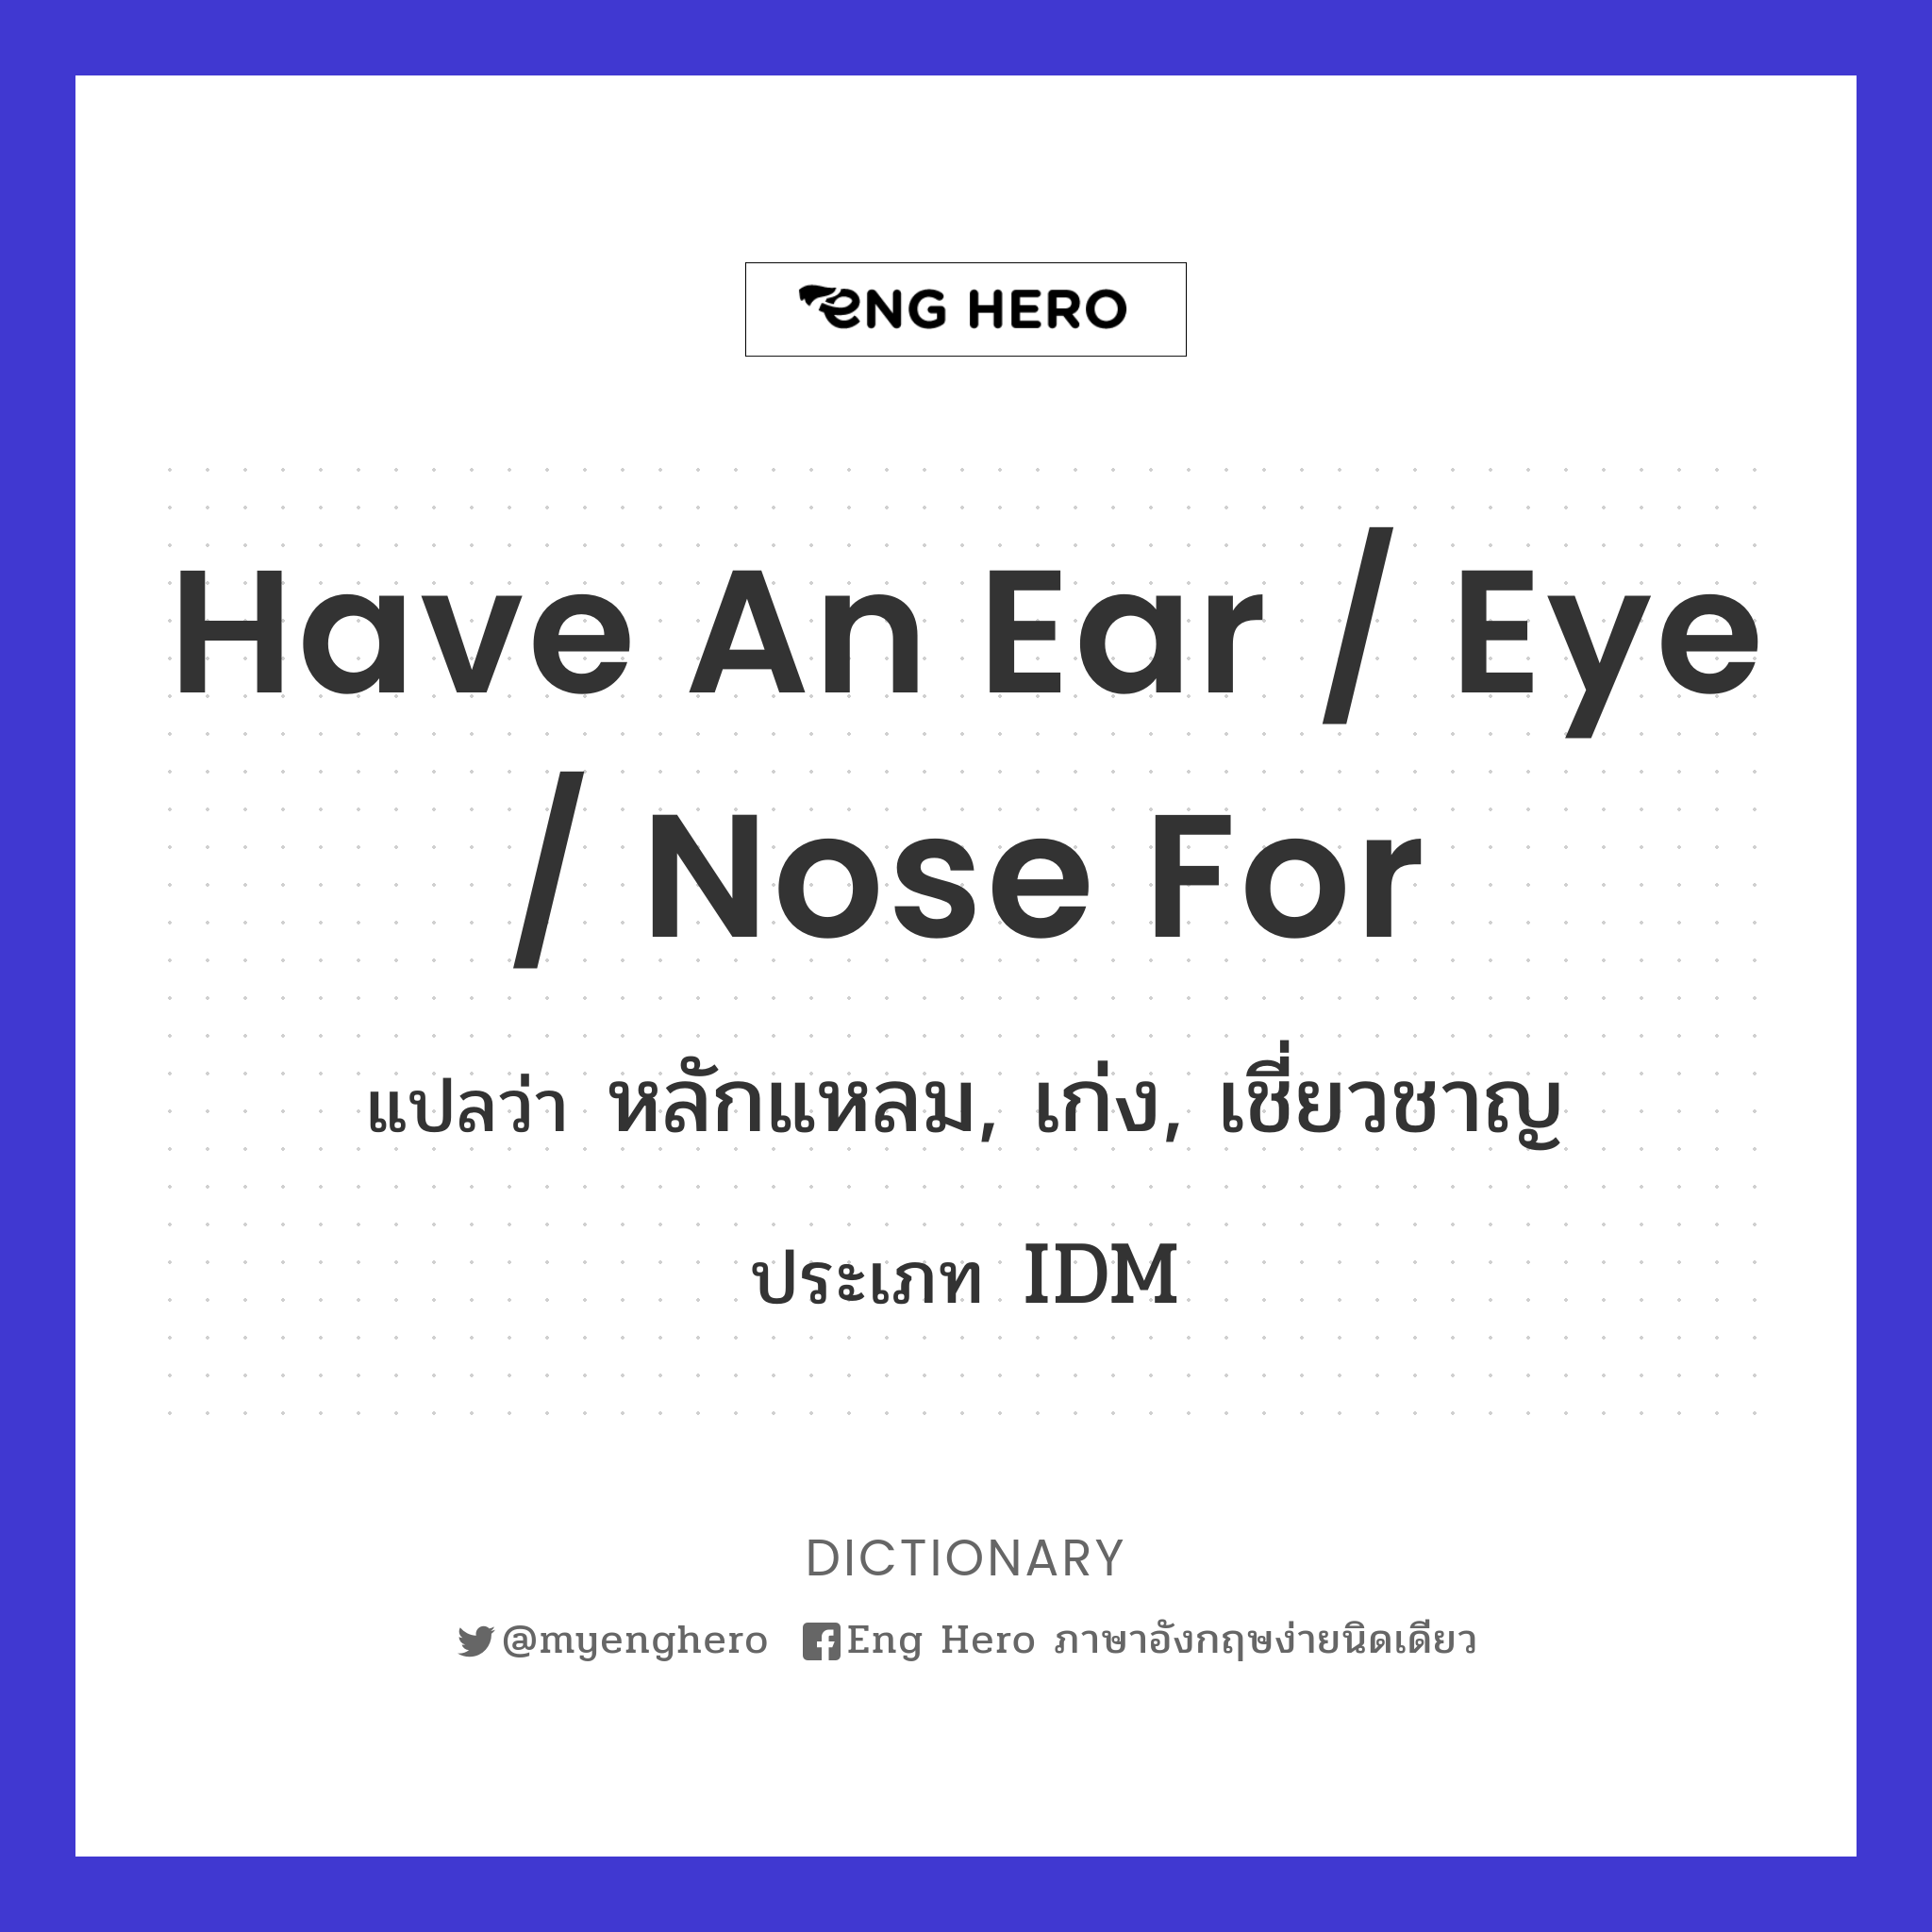 have an ear / eye / nose for